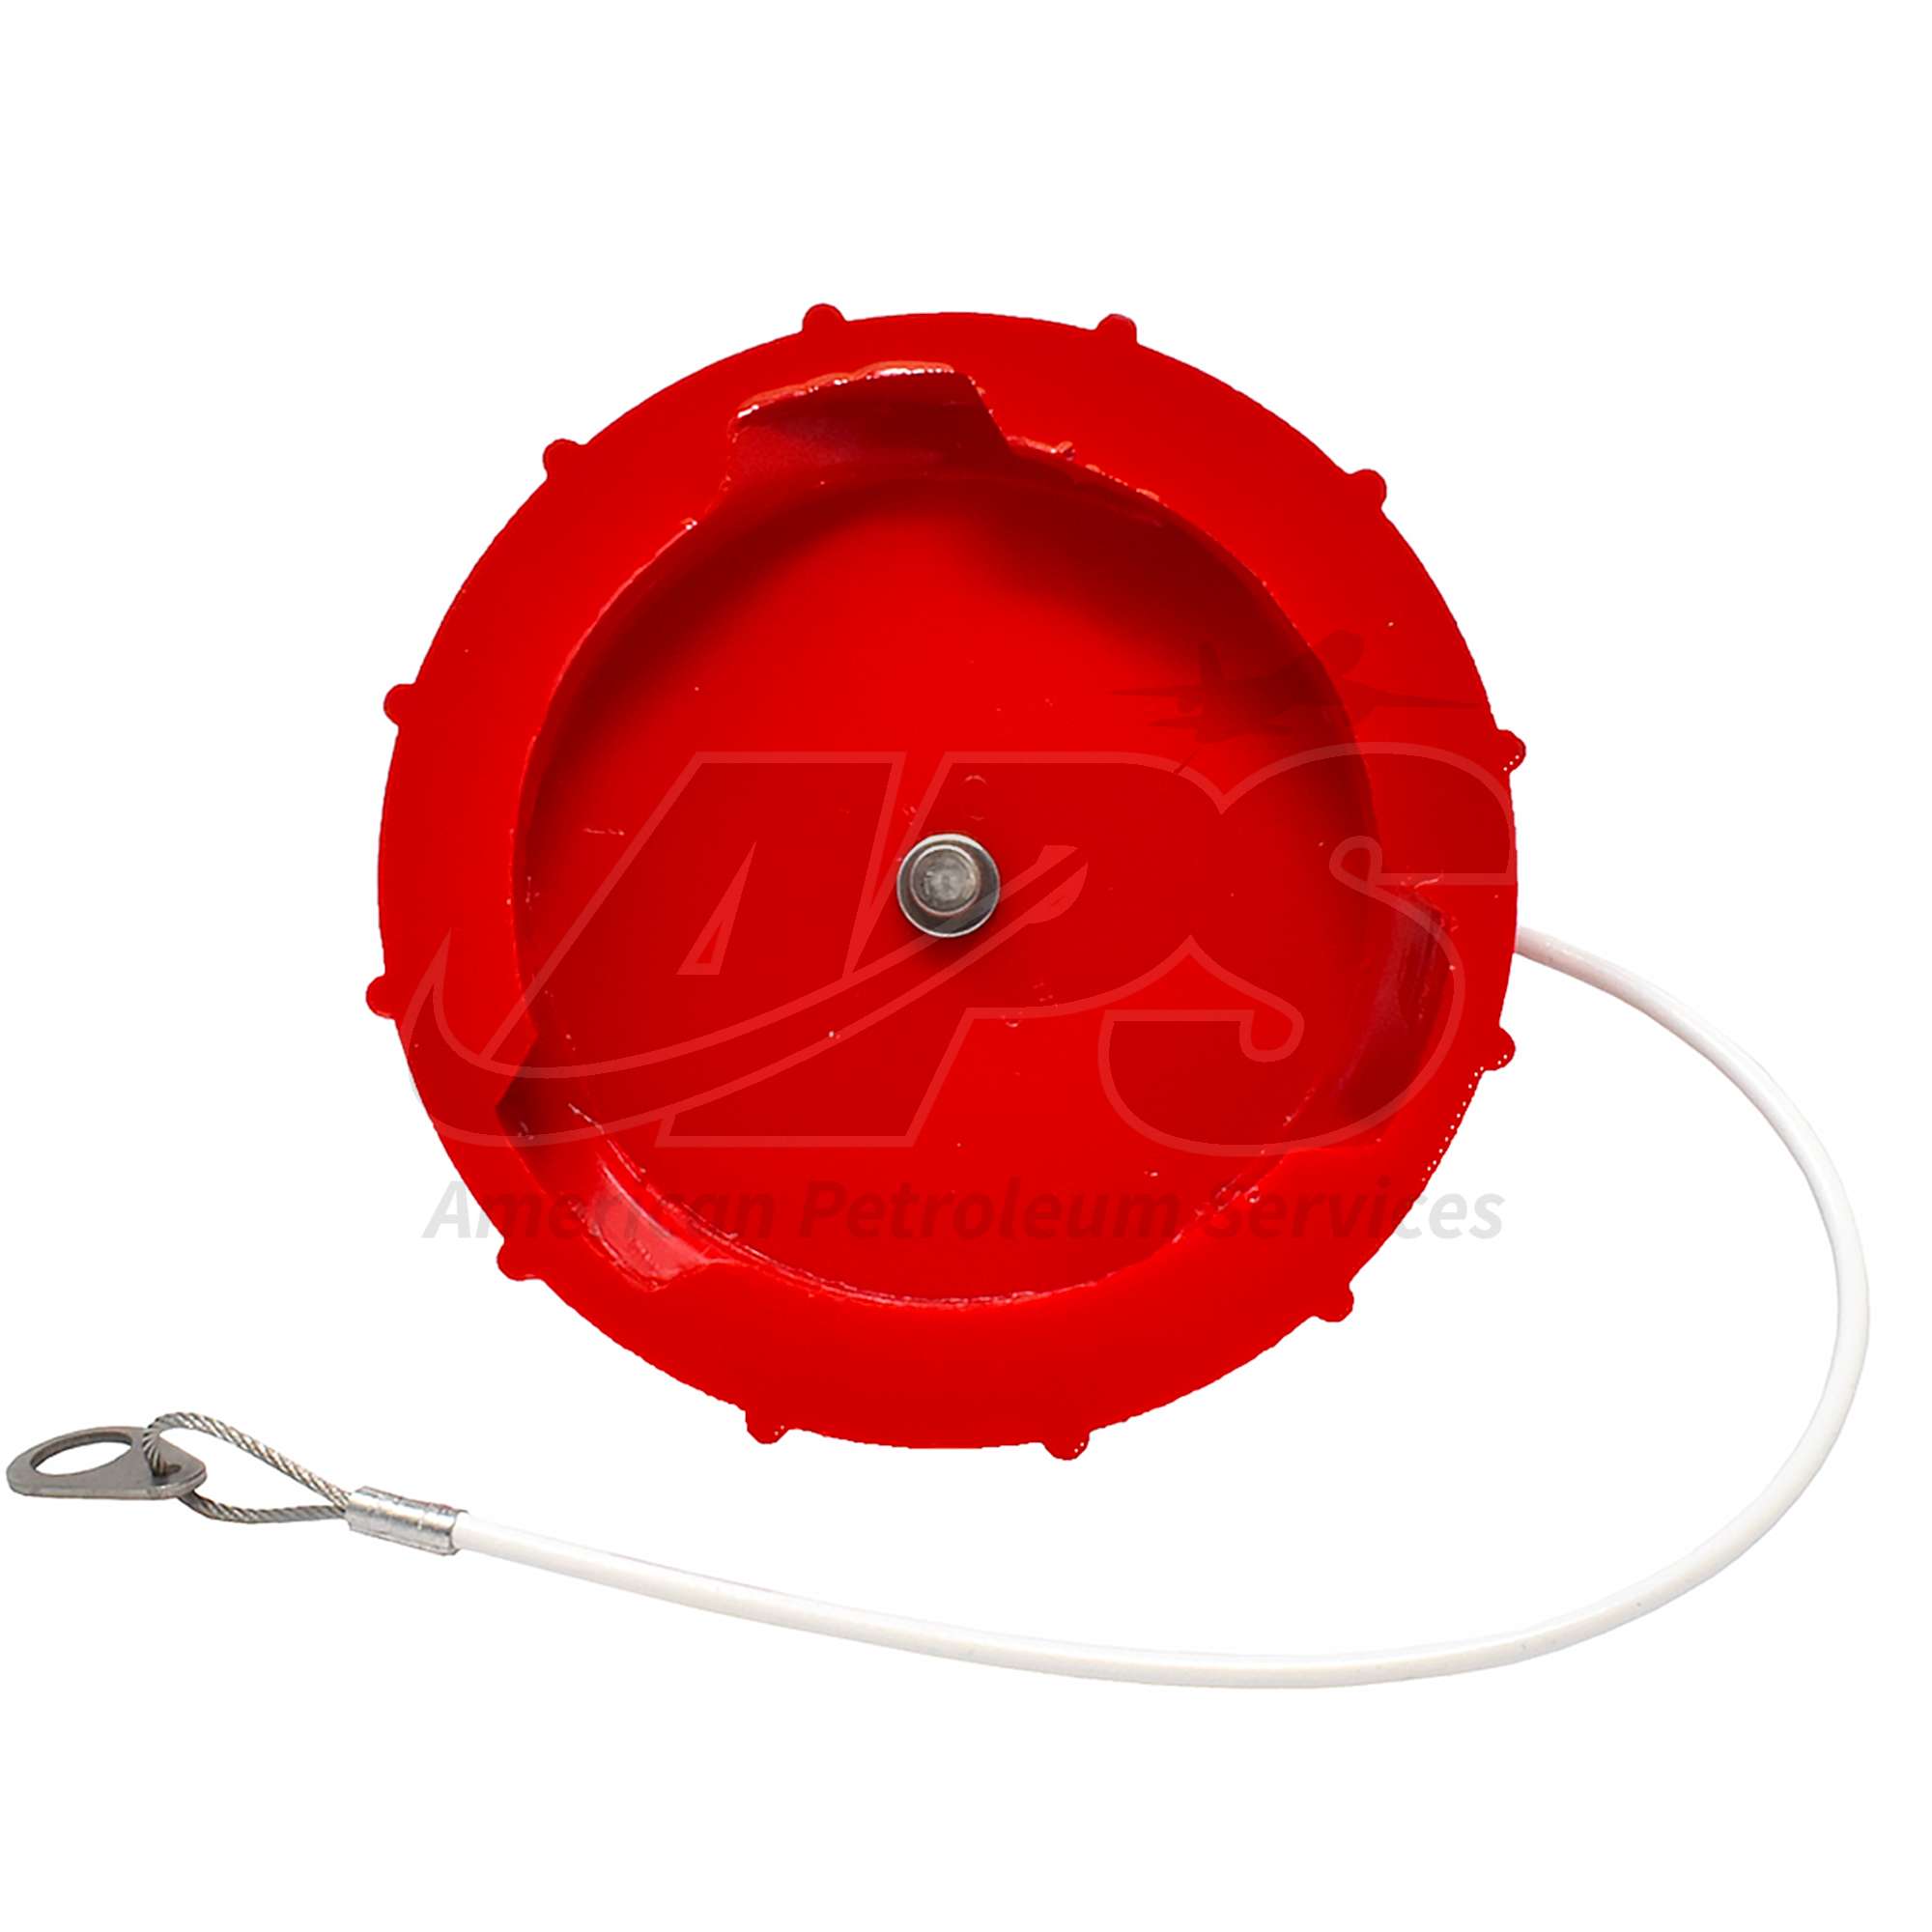 DC 2.5/3R DUST COVER FOR 2-1/2 3 LUG FUEL LOADING ADAPTER (RED)